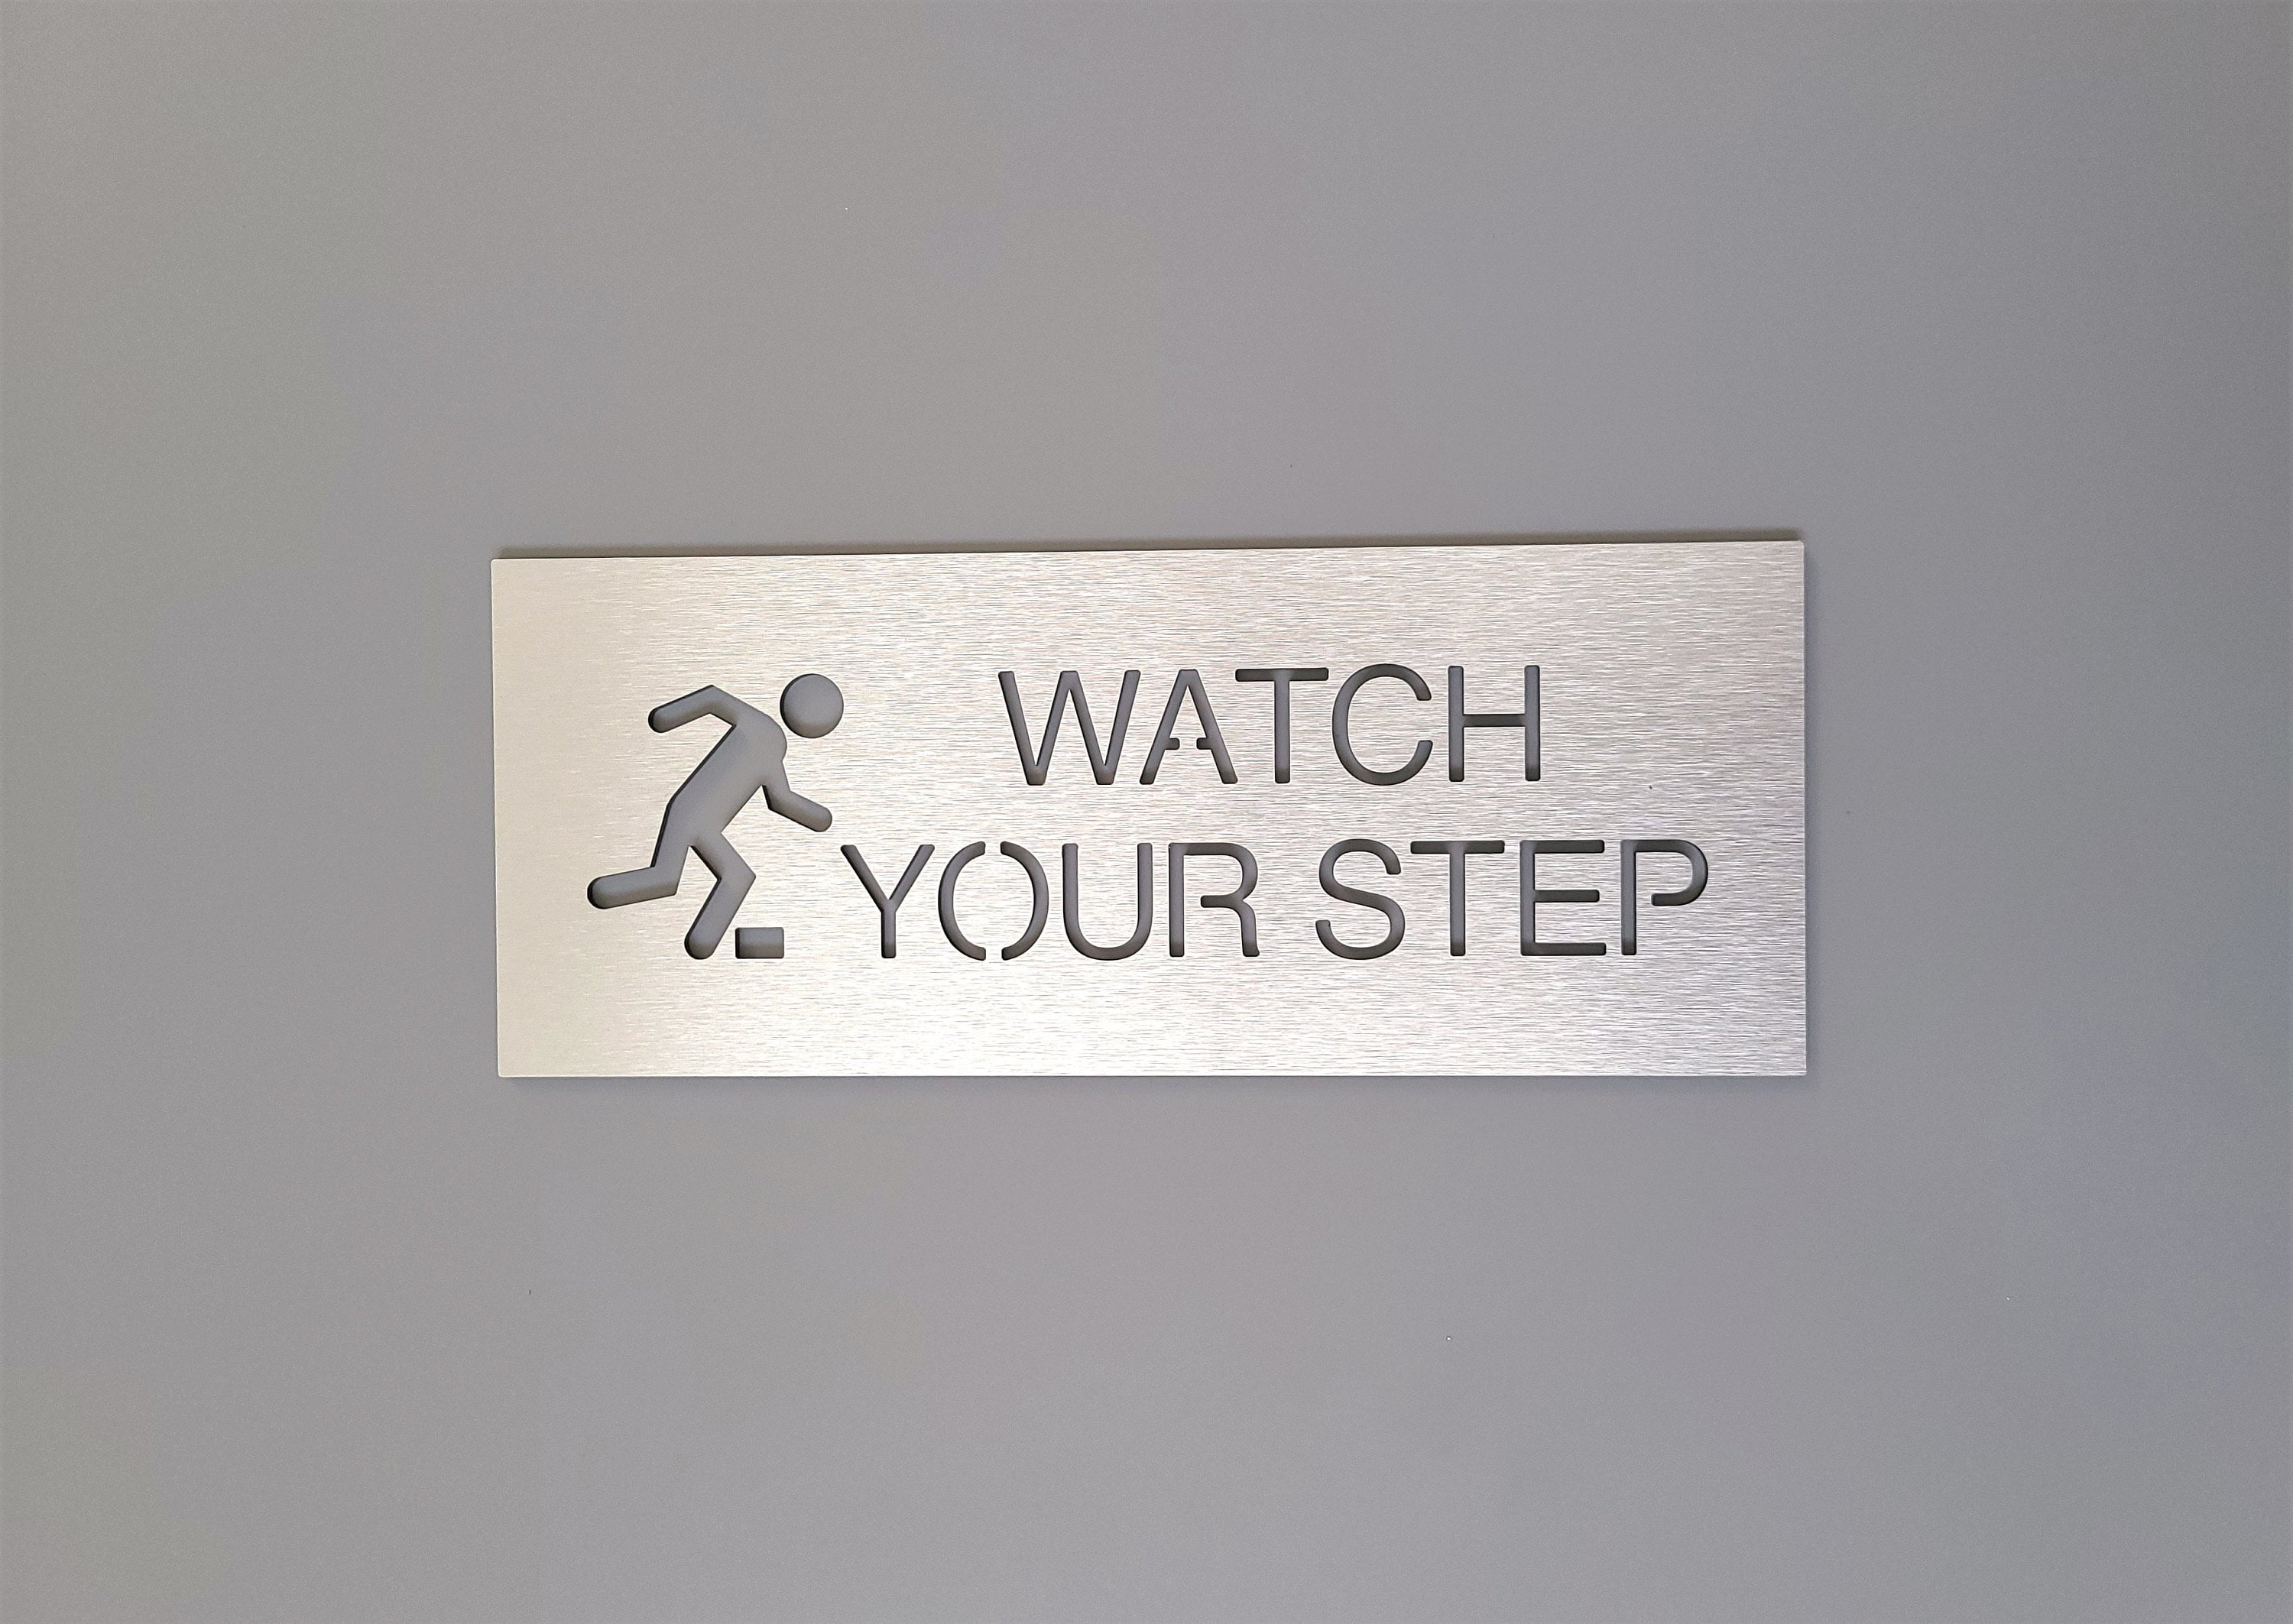 watch-your-step-sign-caution-watch-your-step-caution-sign-with